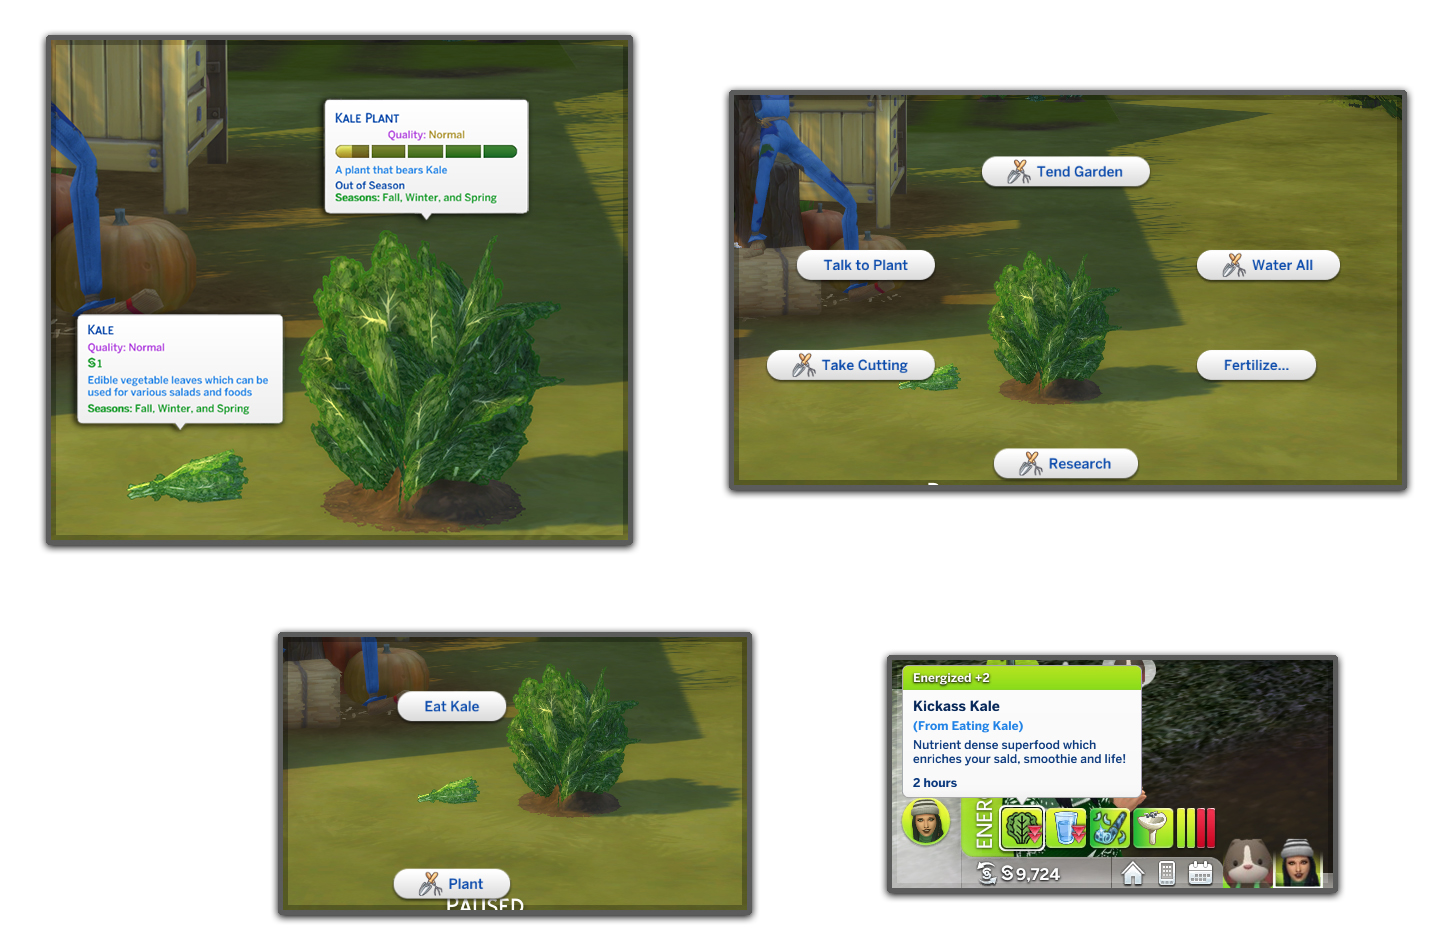 the sims 4 complete mac torrent